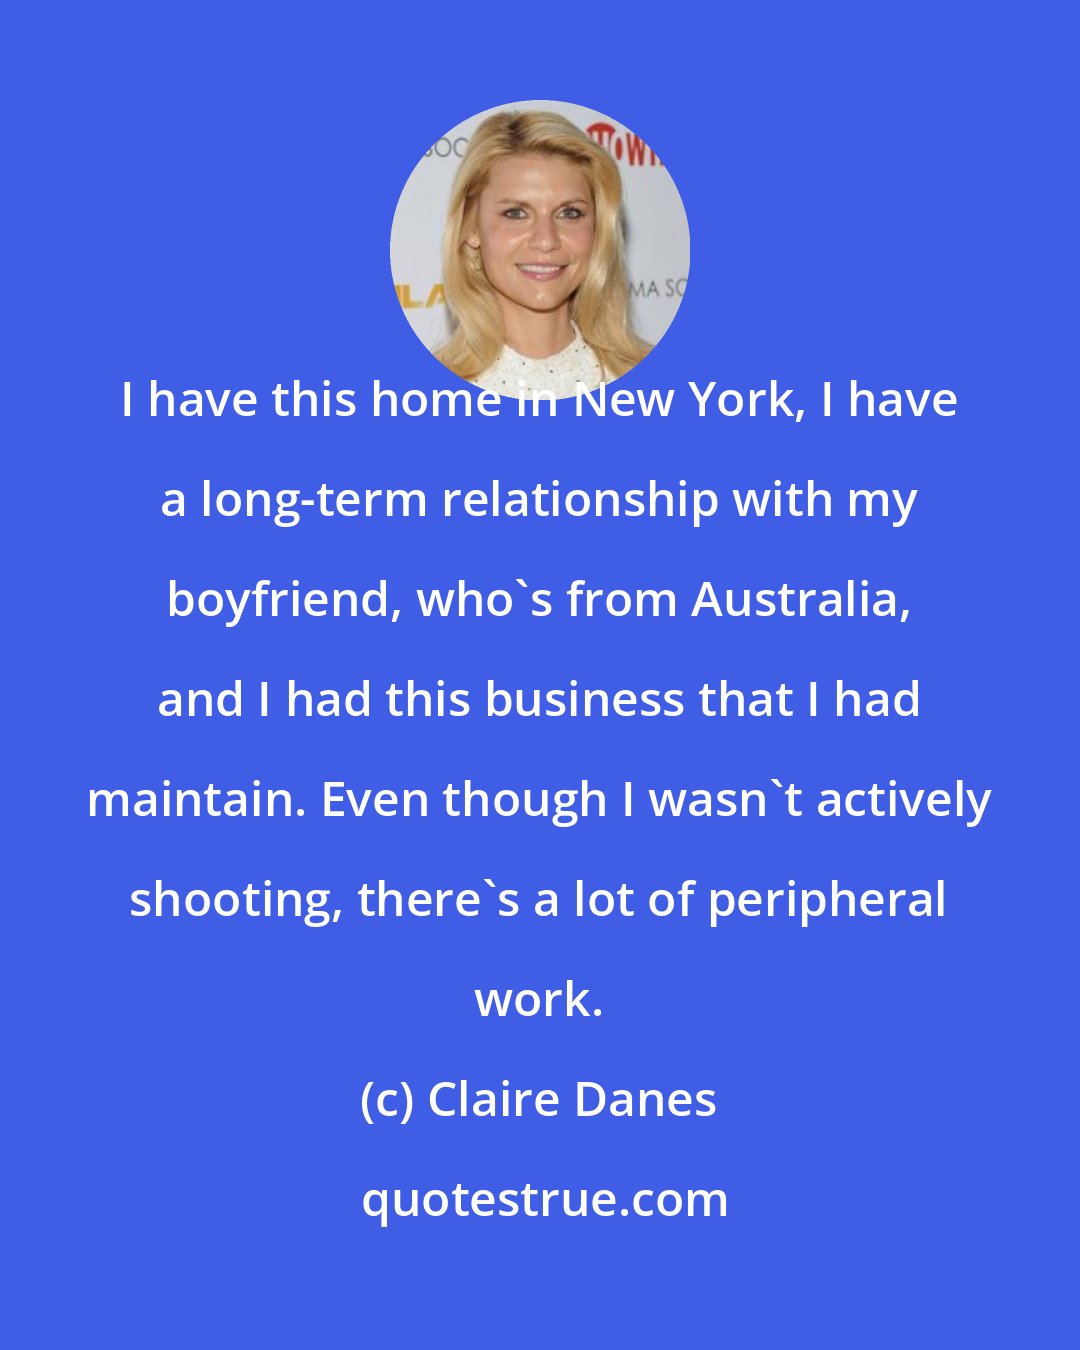 Claire Danes: I have this home in New York, I have a long-term relationship with my boyfriend, who's from Australia, and I had this business that I had maintain. Even though I wasn't actively shooting, there's a lot of peripheral work.